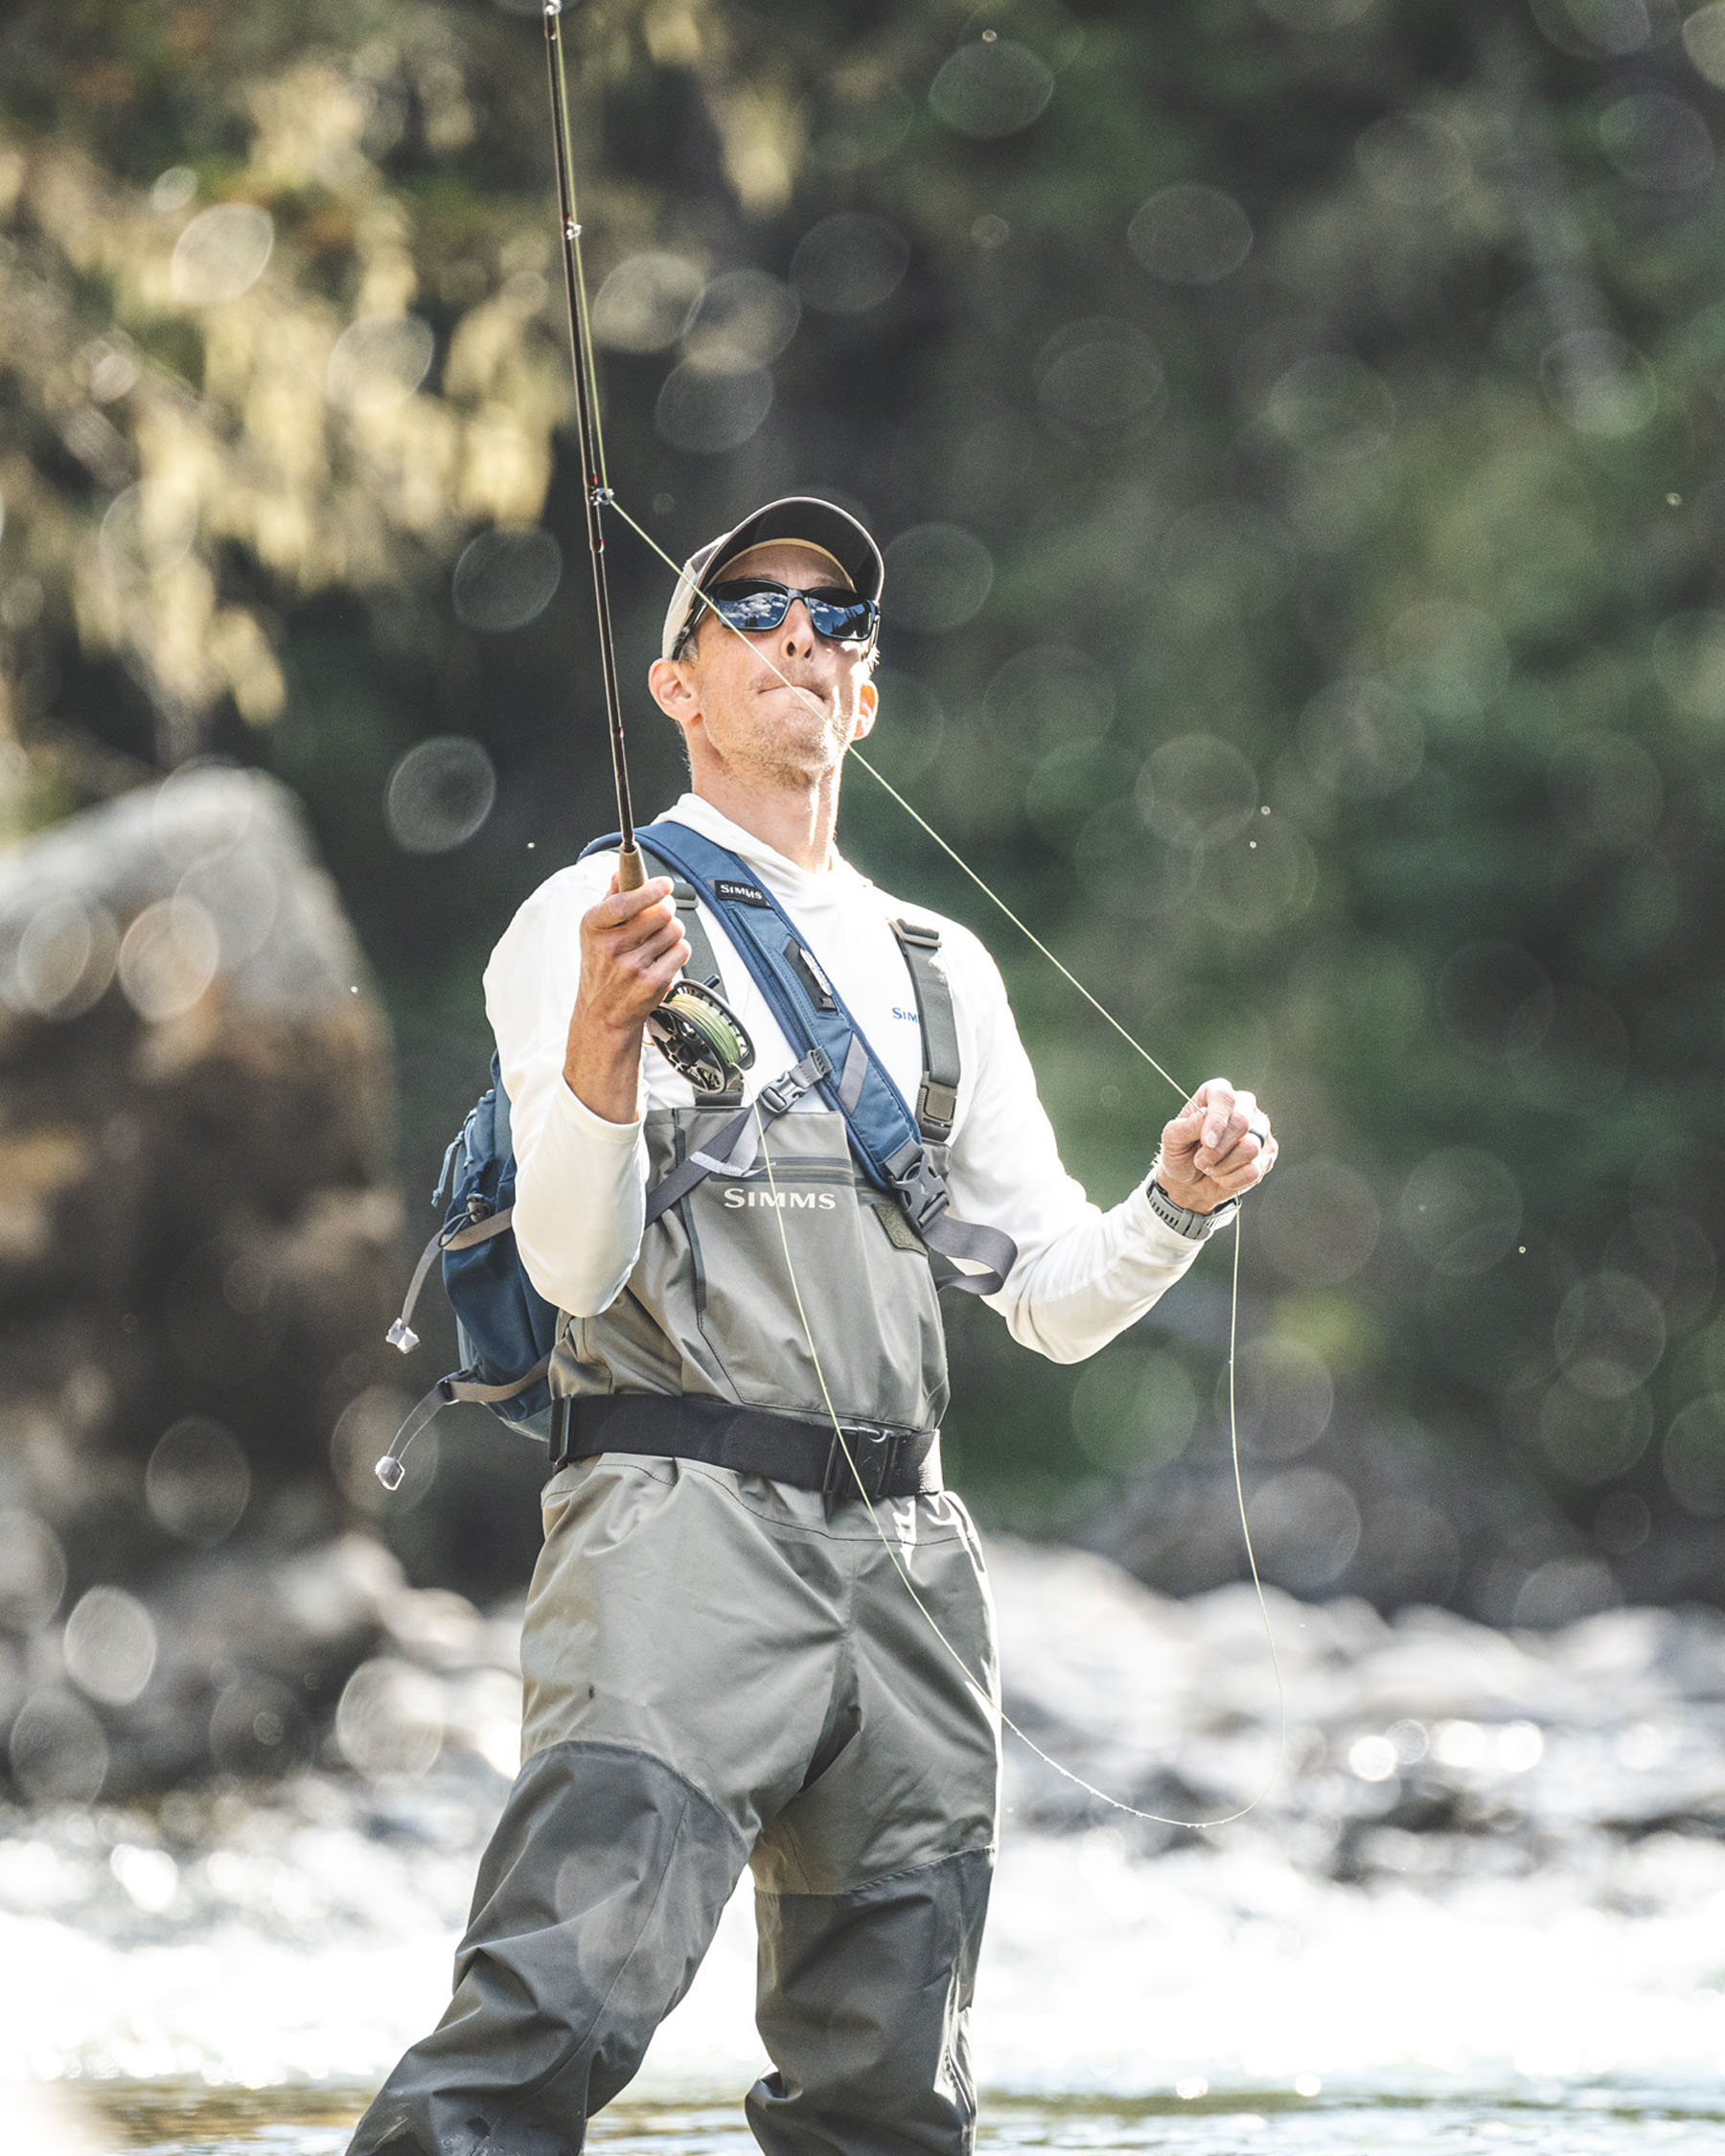 Simms Tributary Stockingfoot Breathable Waders